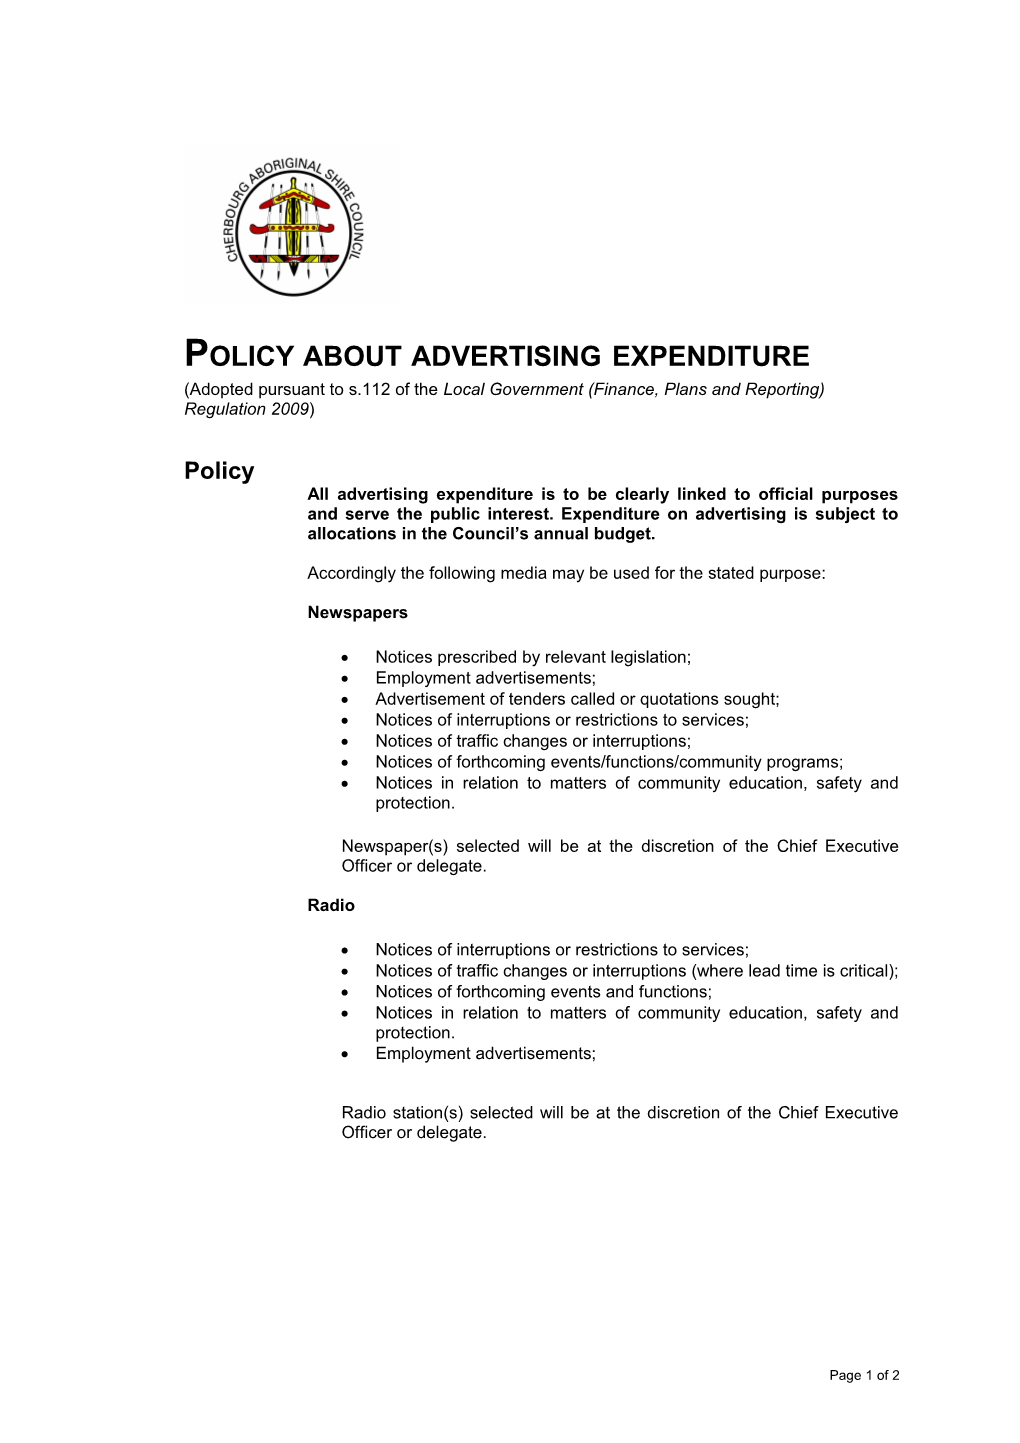 Policy About Advertising Expenditure